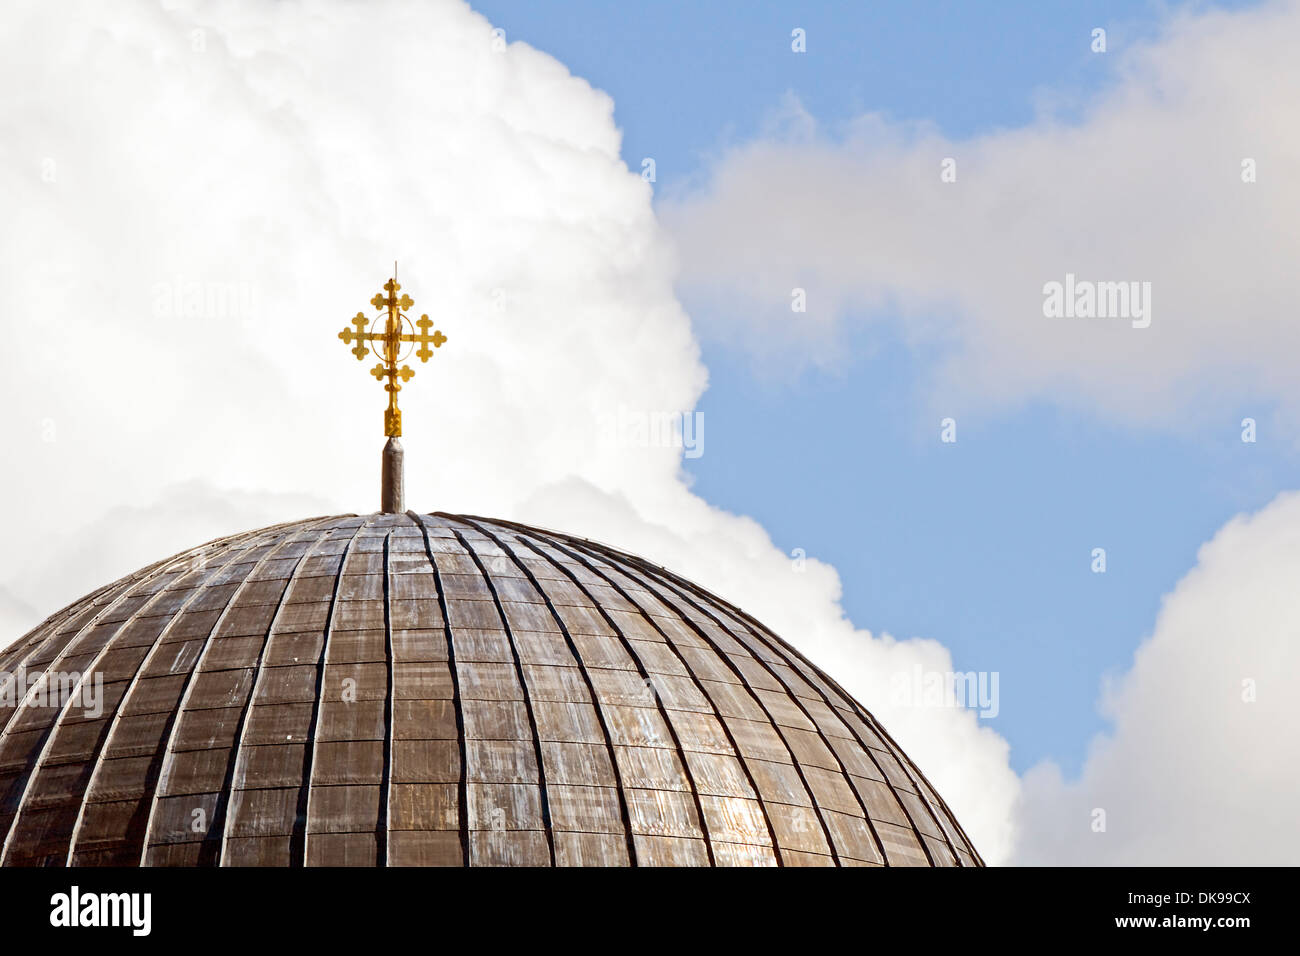 Close-up of a church dome with cross against a cloudy sky Stock Photo